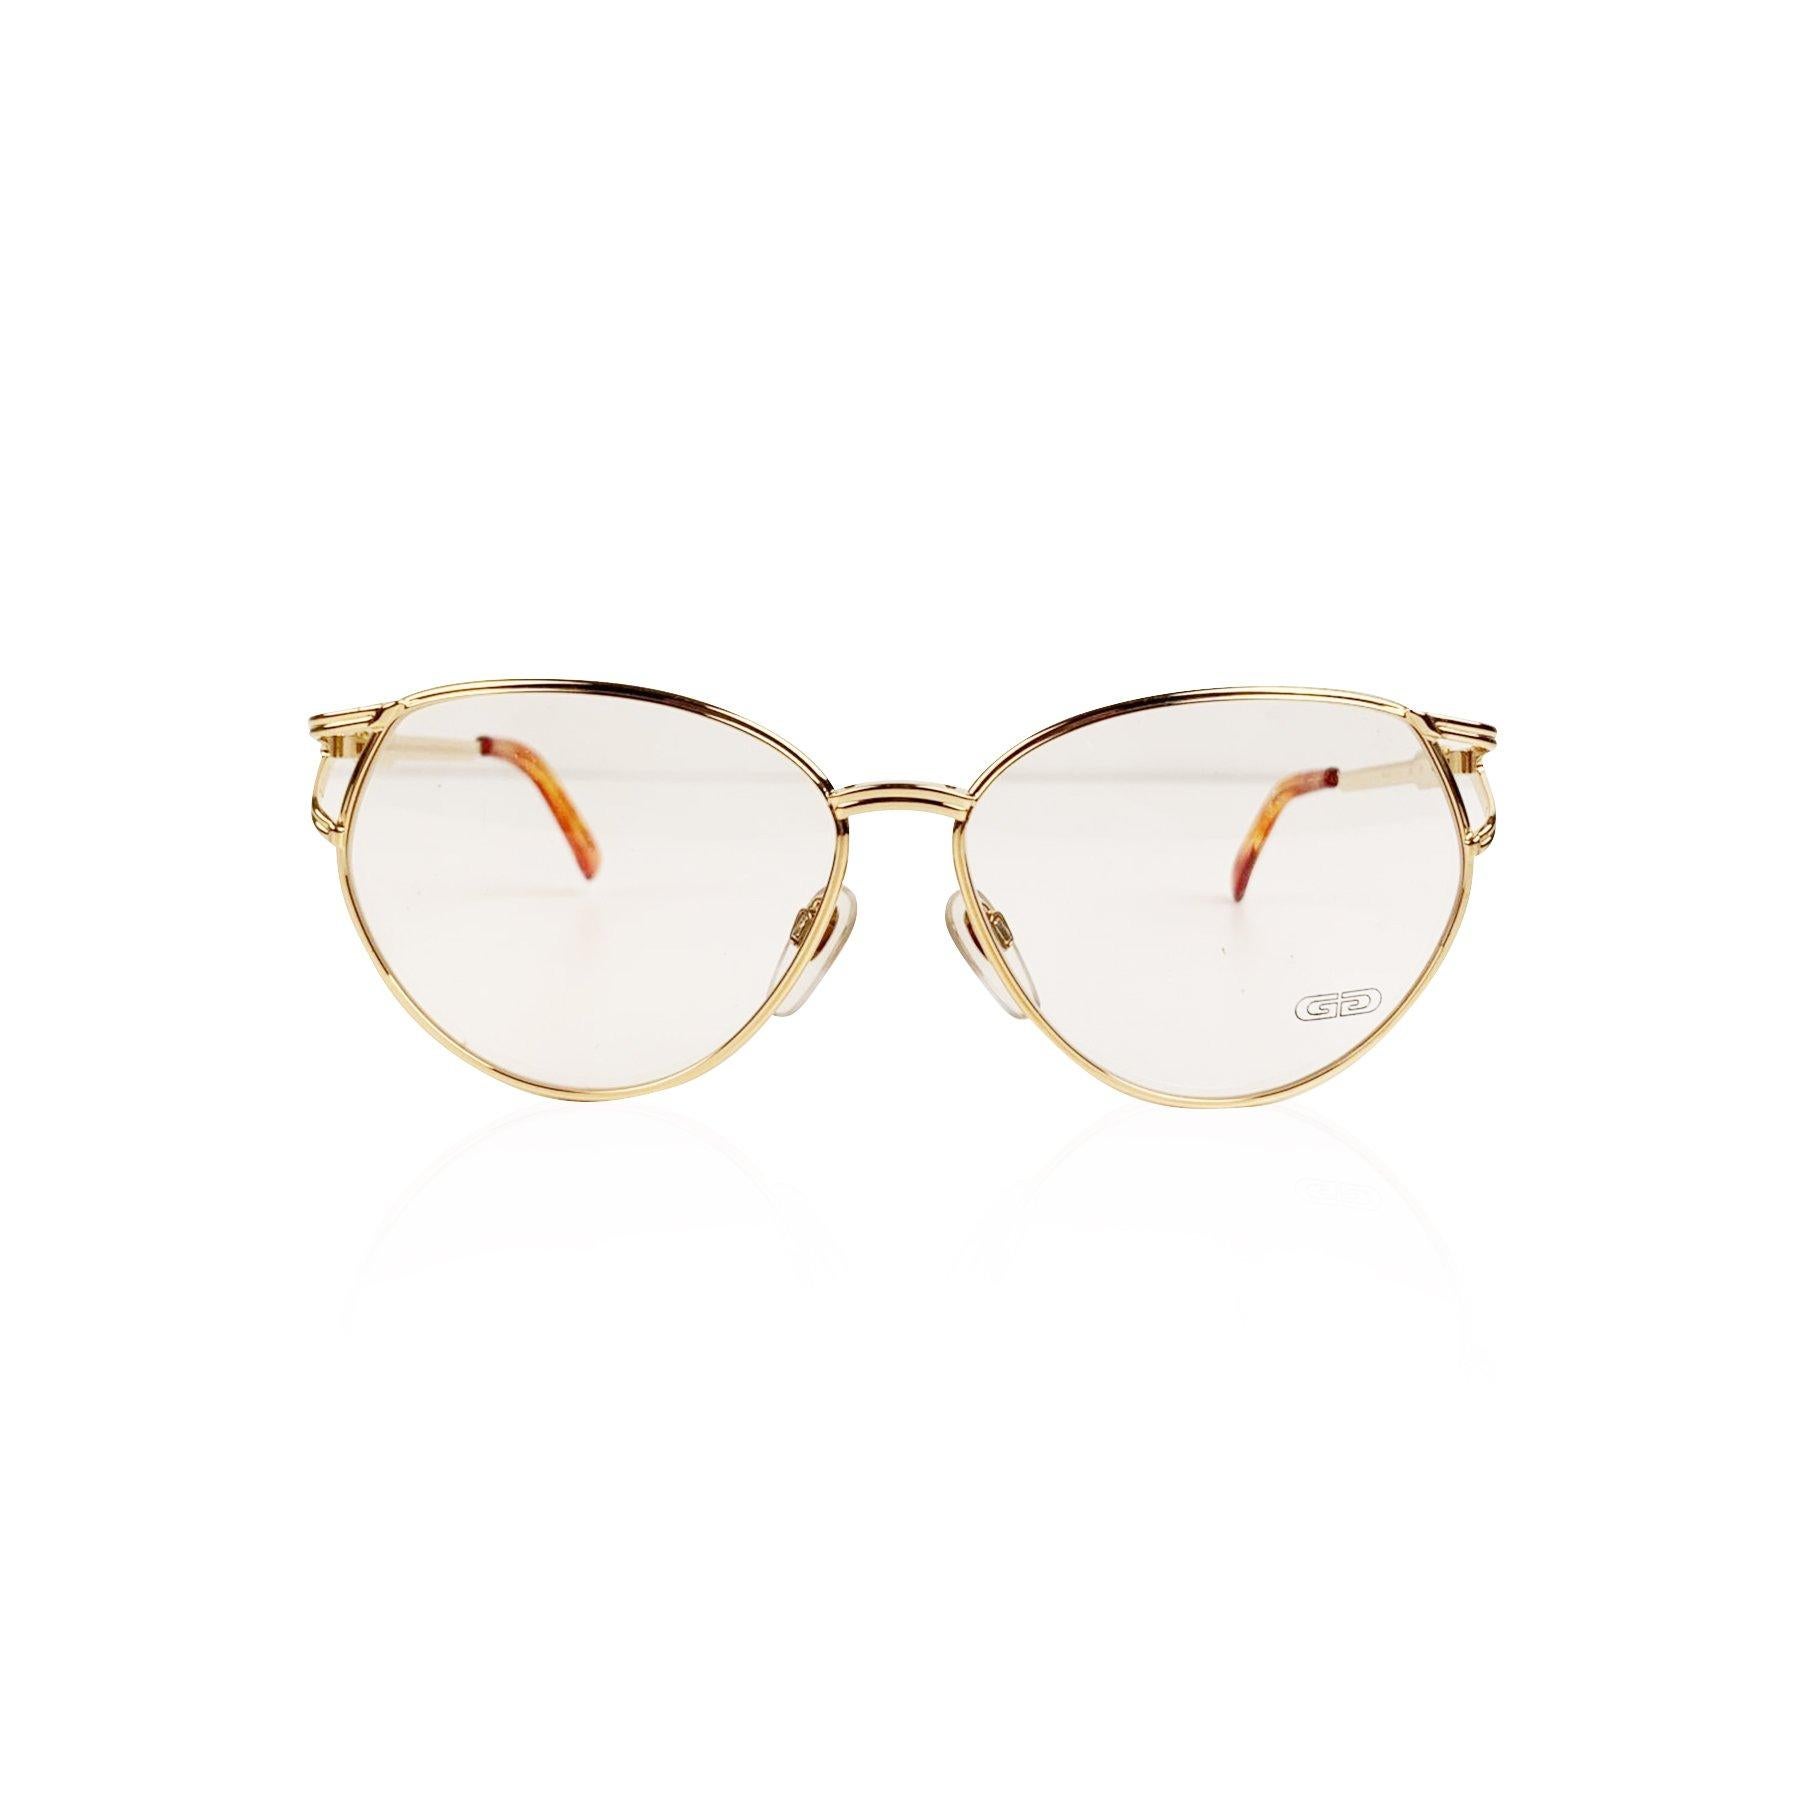 Gold plated eyeglasses by Gerald Genta by Orama, from the early 1990s. Model: New Classic 05 - AU - 130 - 9301932 - CE93. Beautiful gold frame. Clear demo lenses. Hand Made in Italy. Details MATERIAL: Gold Plated COLOR: Gold MODEL: New Classic 05